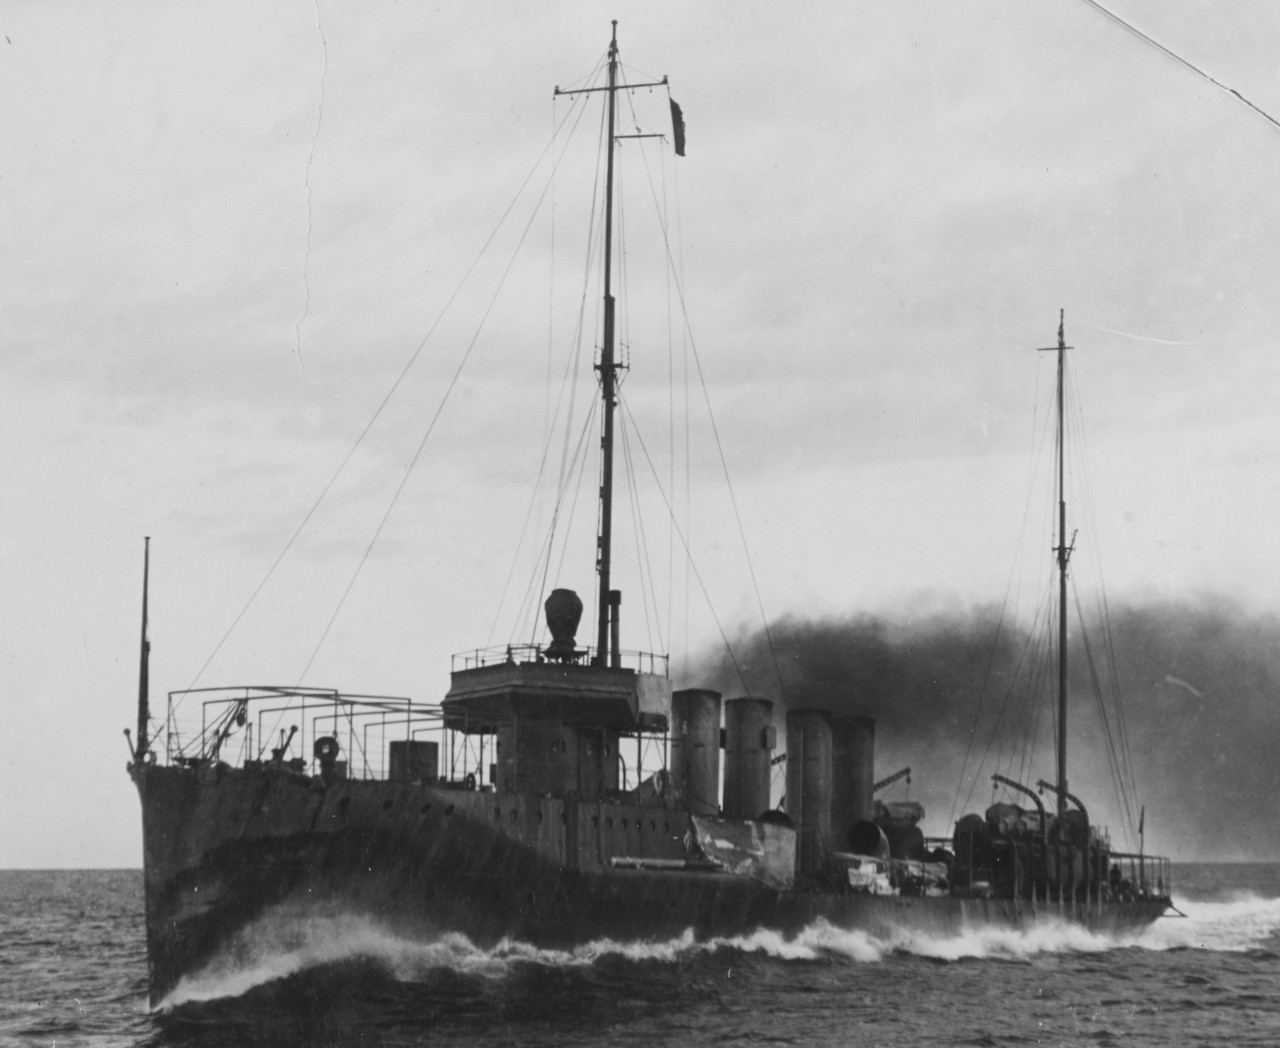 Tucker running trials, making 30.03 knots, 19 March 1916. At this point, less than a month prior to her being commissioned, she has not received her armament, and weights have been installed in place of her guns. (Naval History and Heritage Comma...